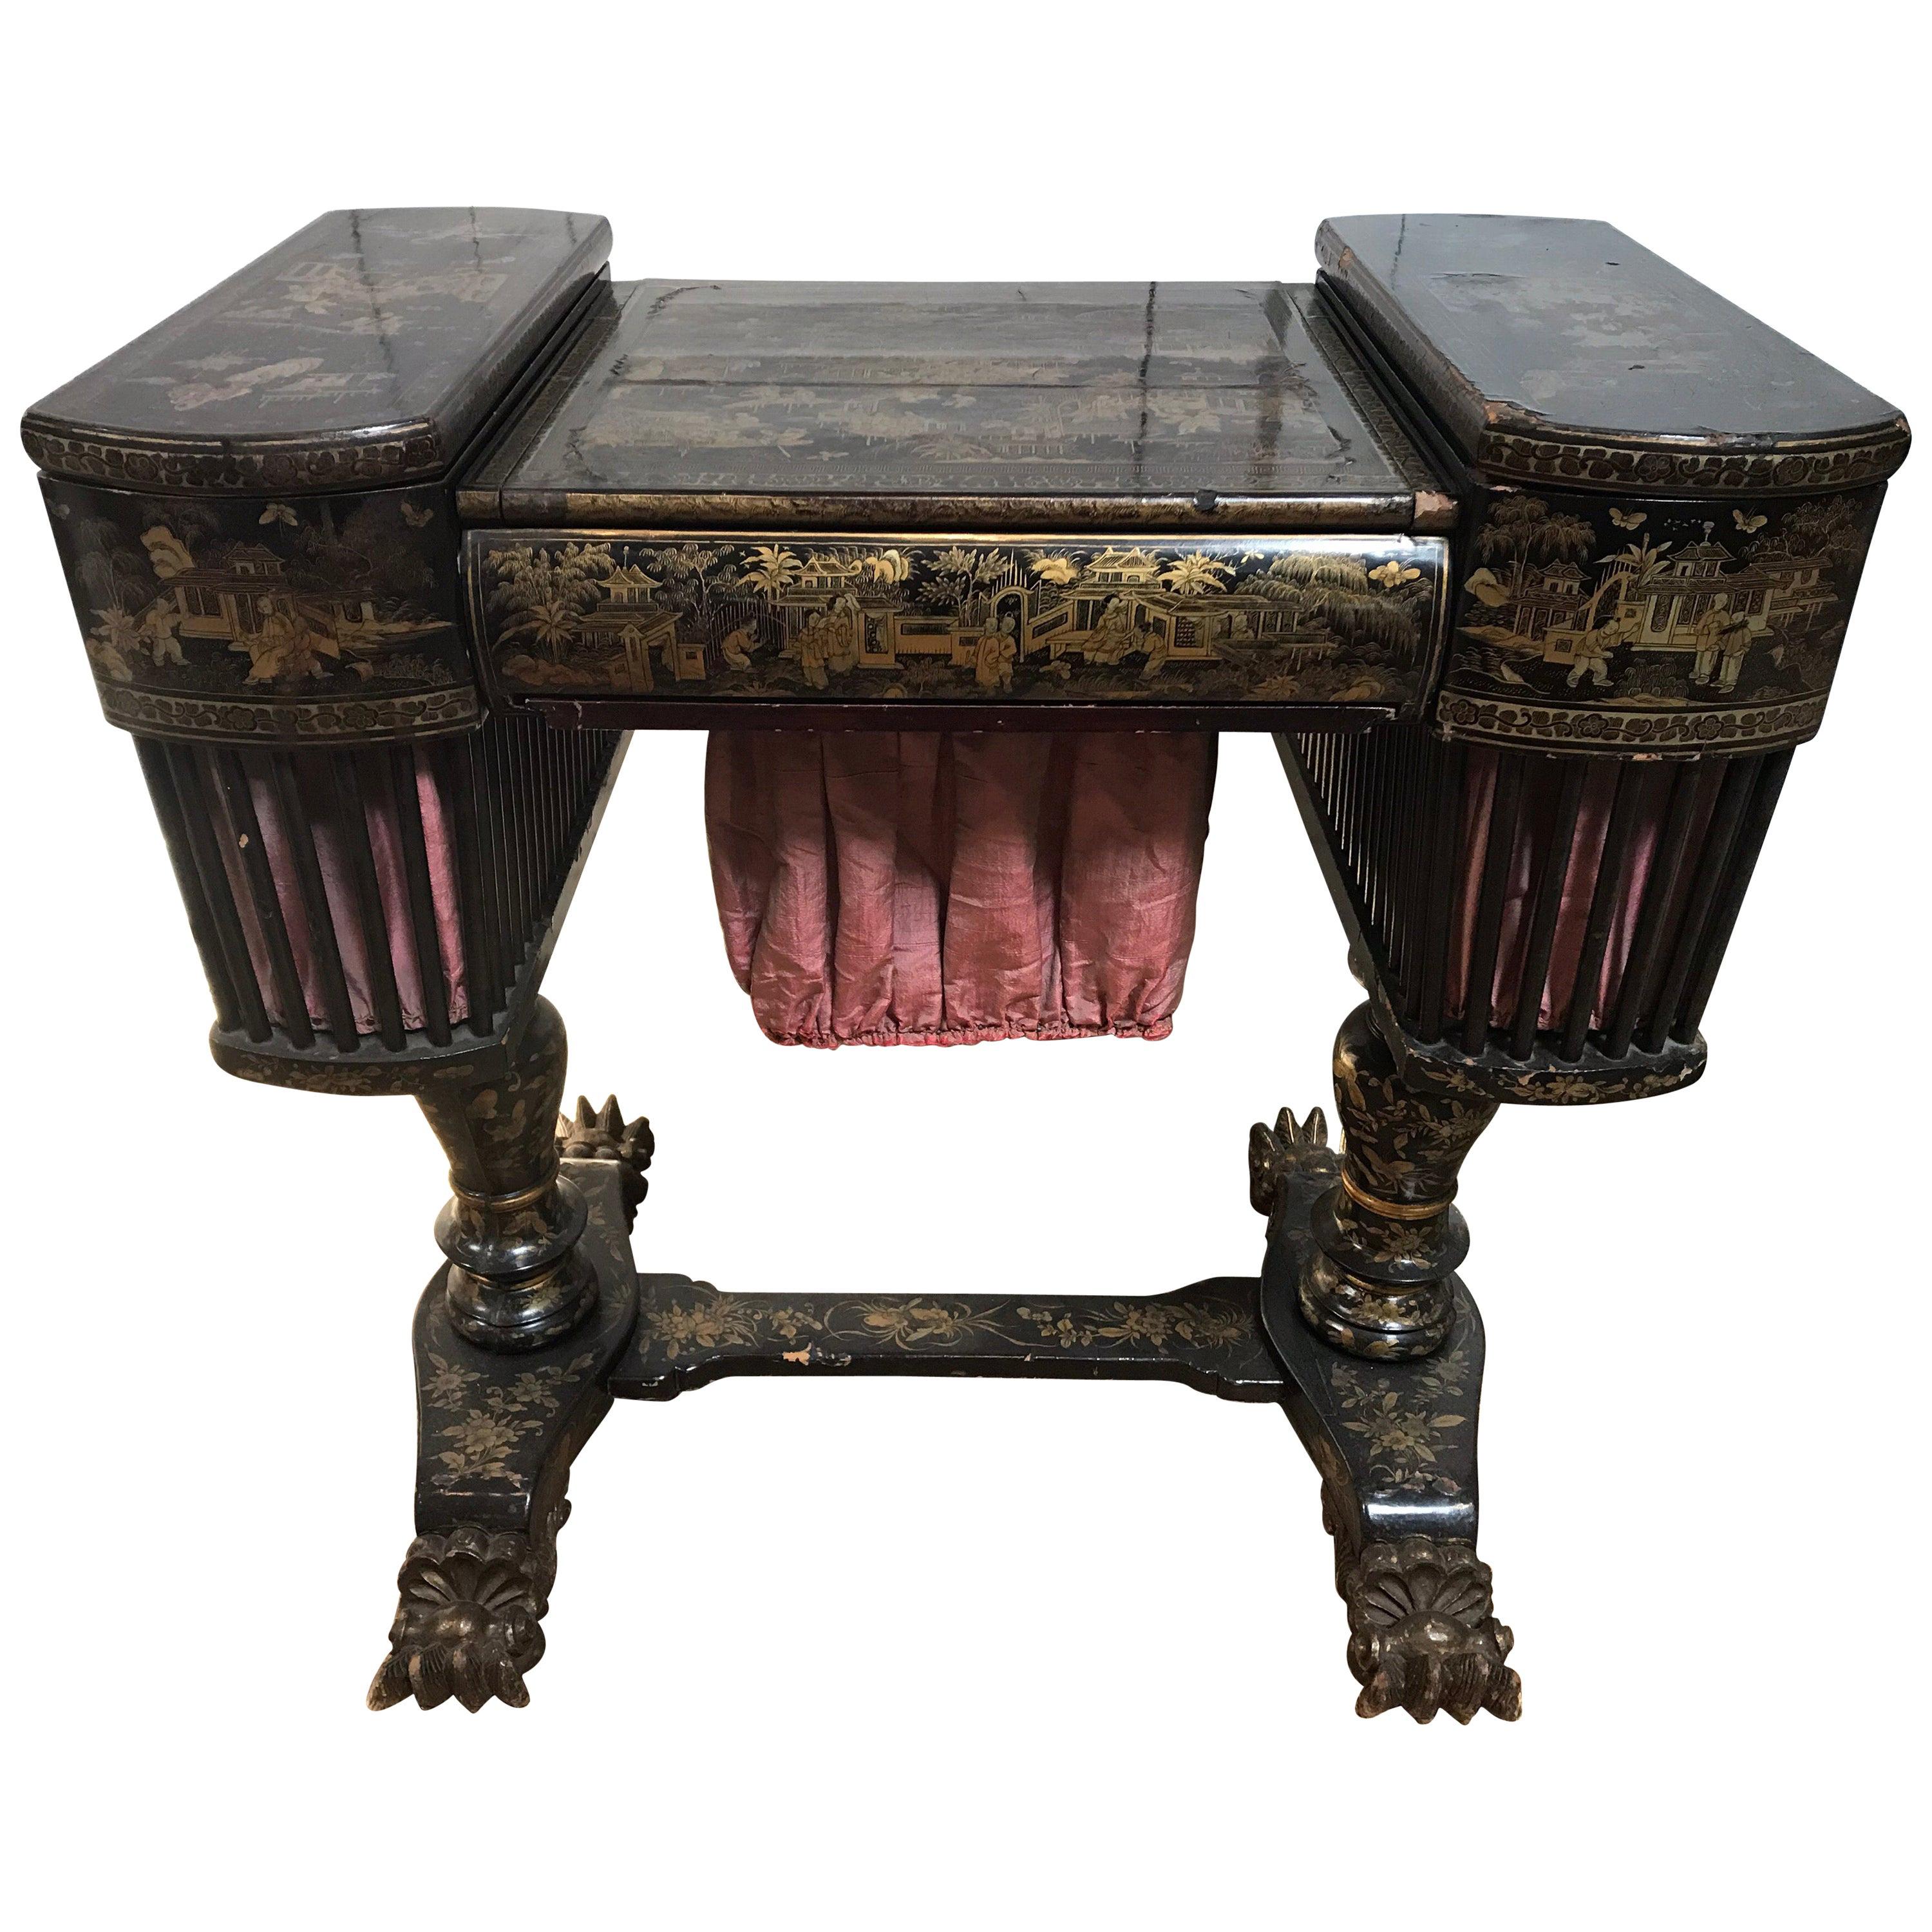 Antique Sewing Table with Chinoiserie Lacquer 'English, Early 19th Century'